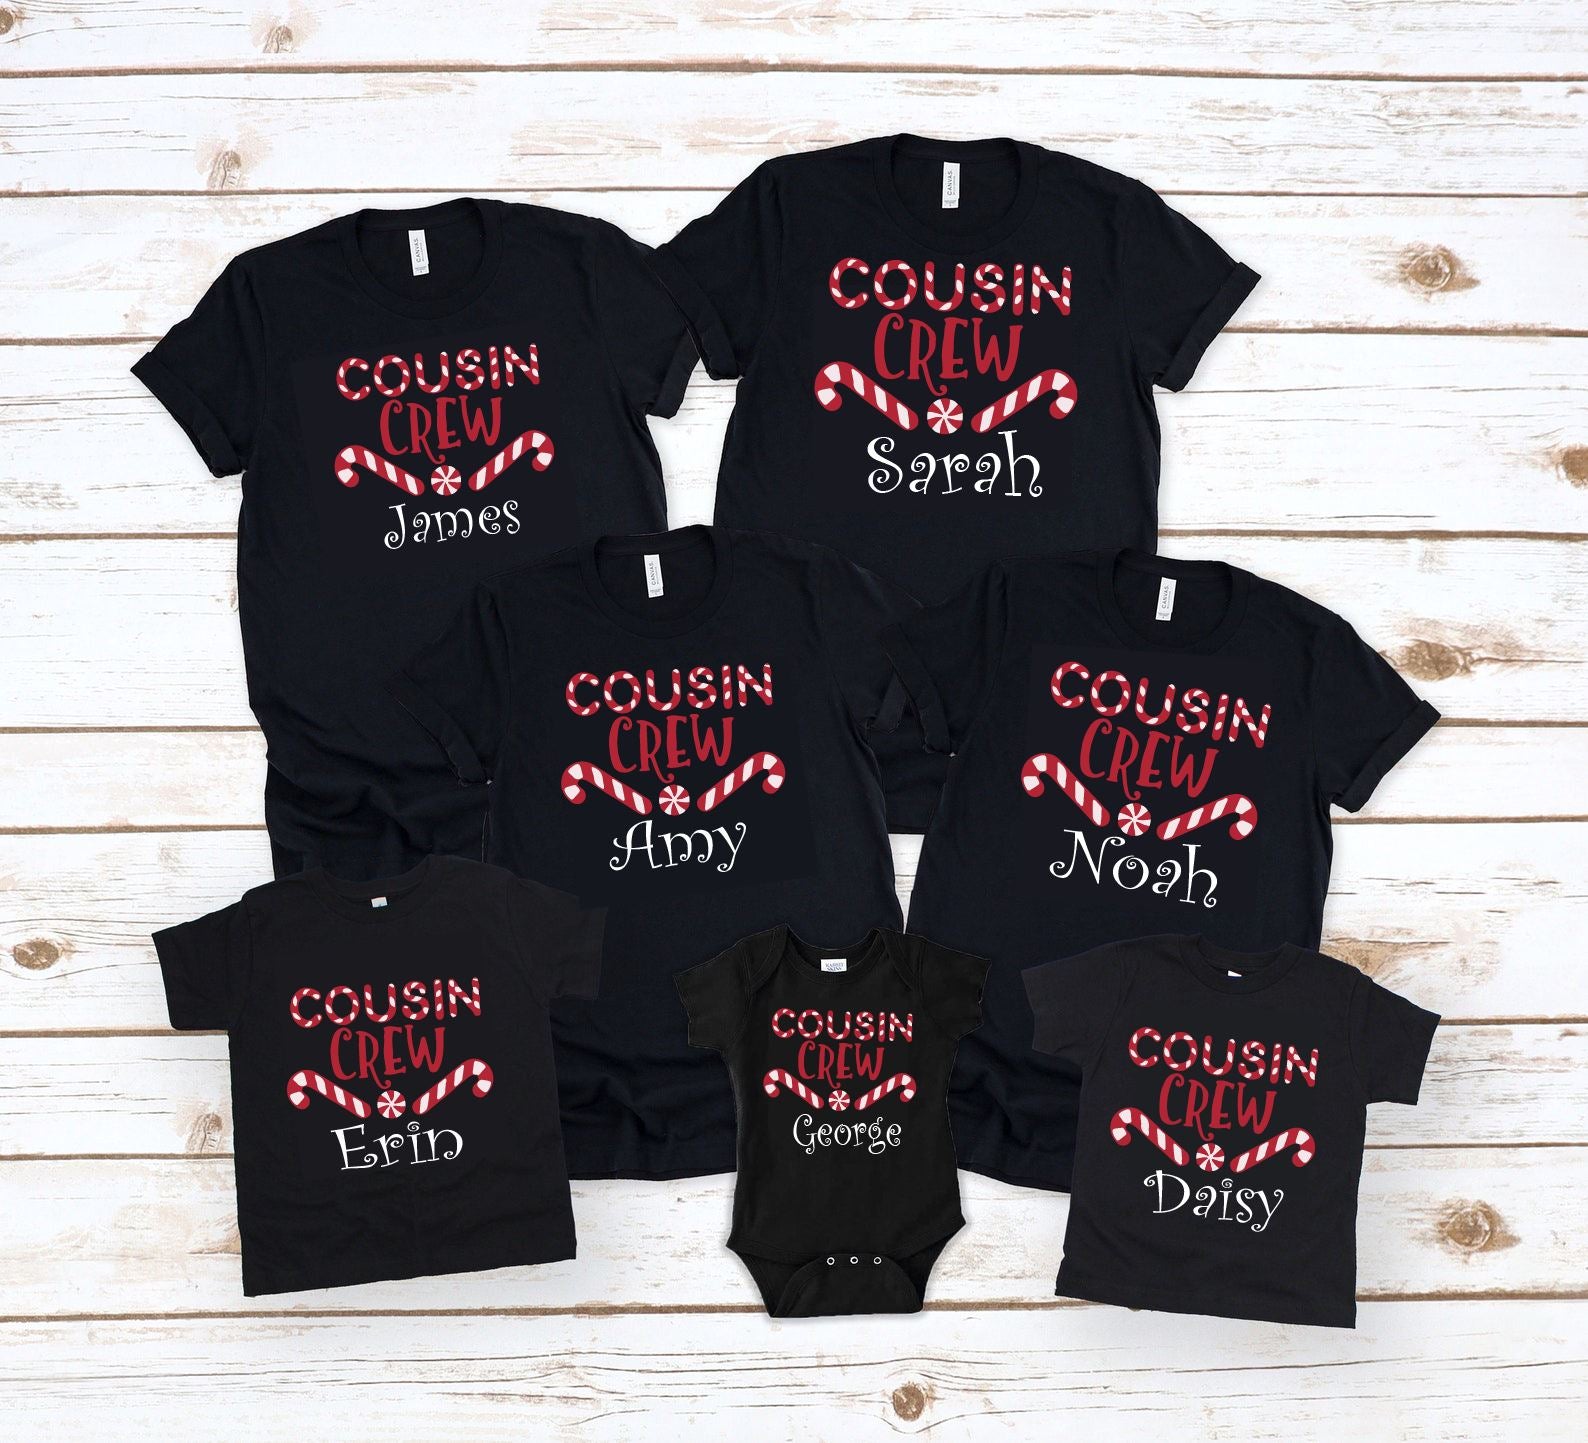 Personalised Christmas Cousin Crew T-shirts